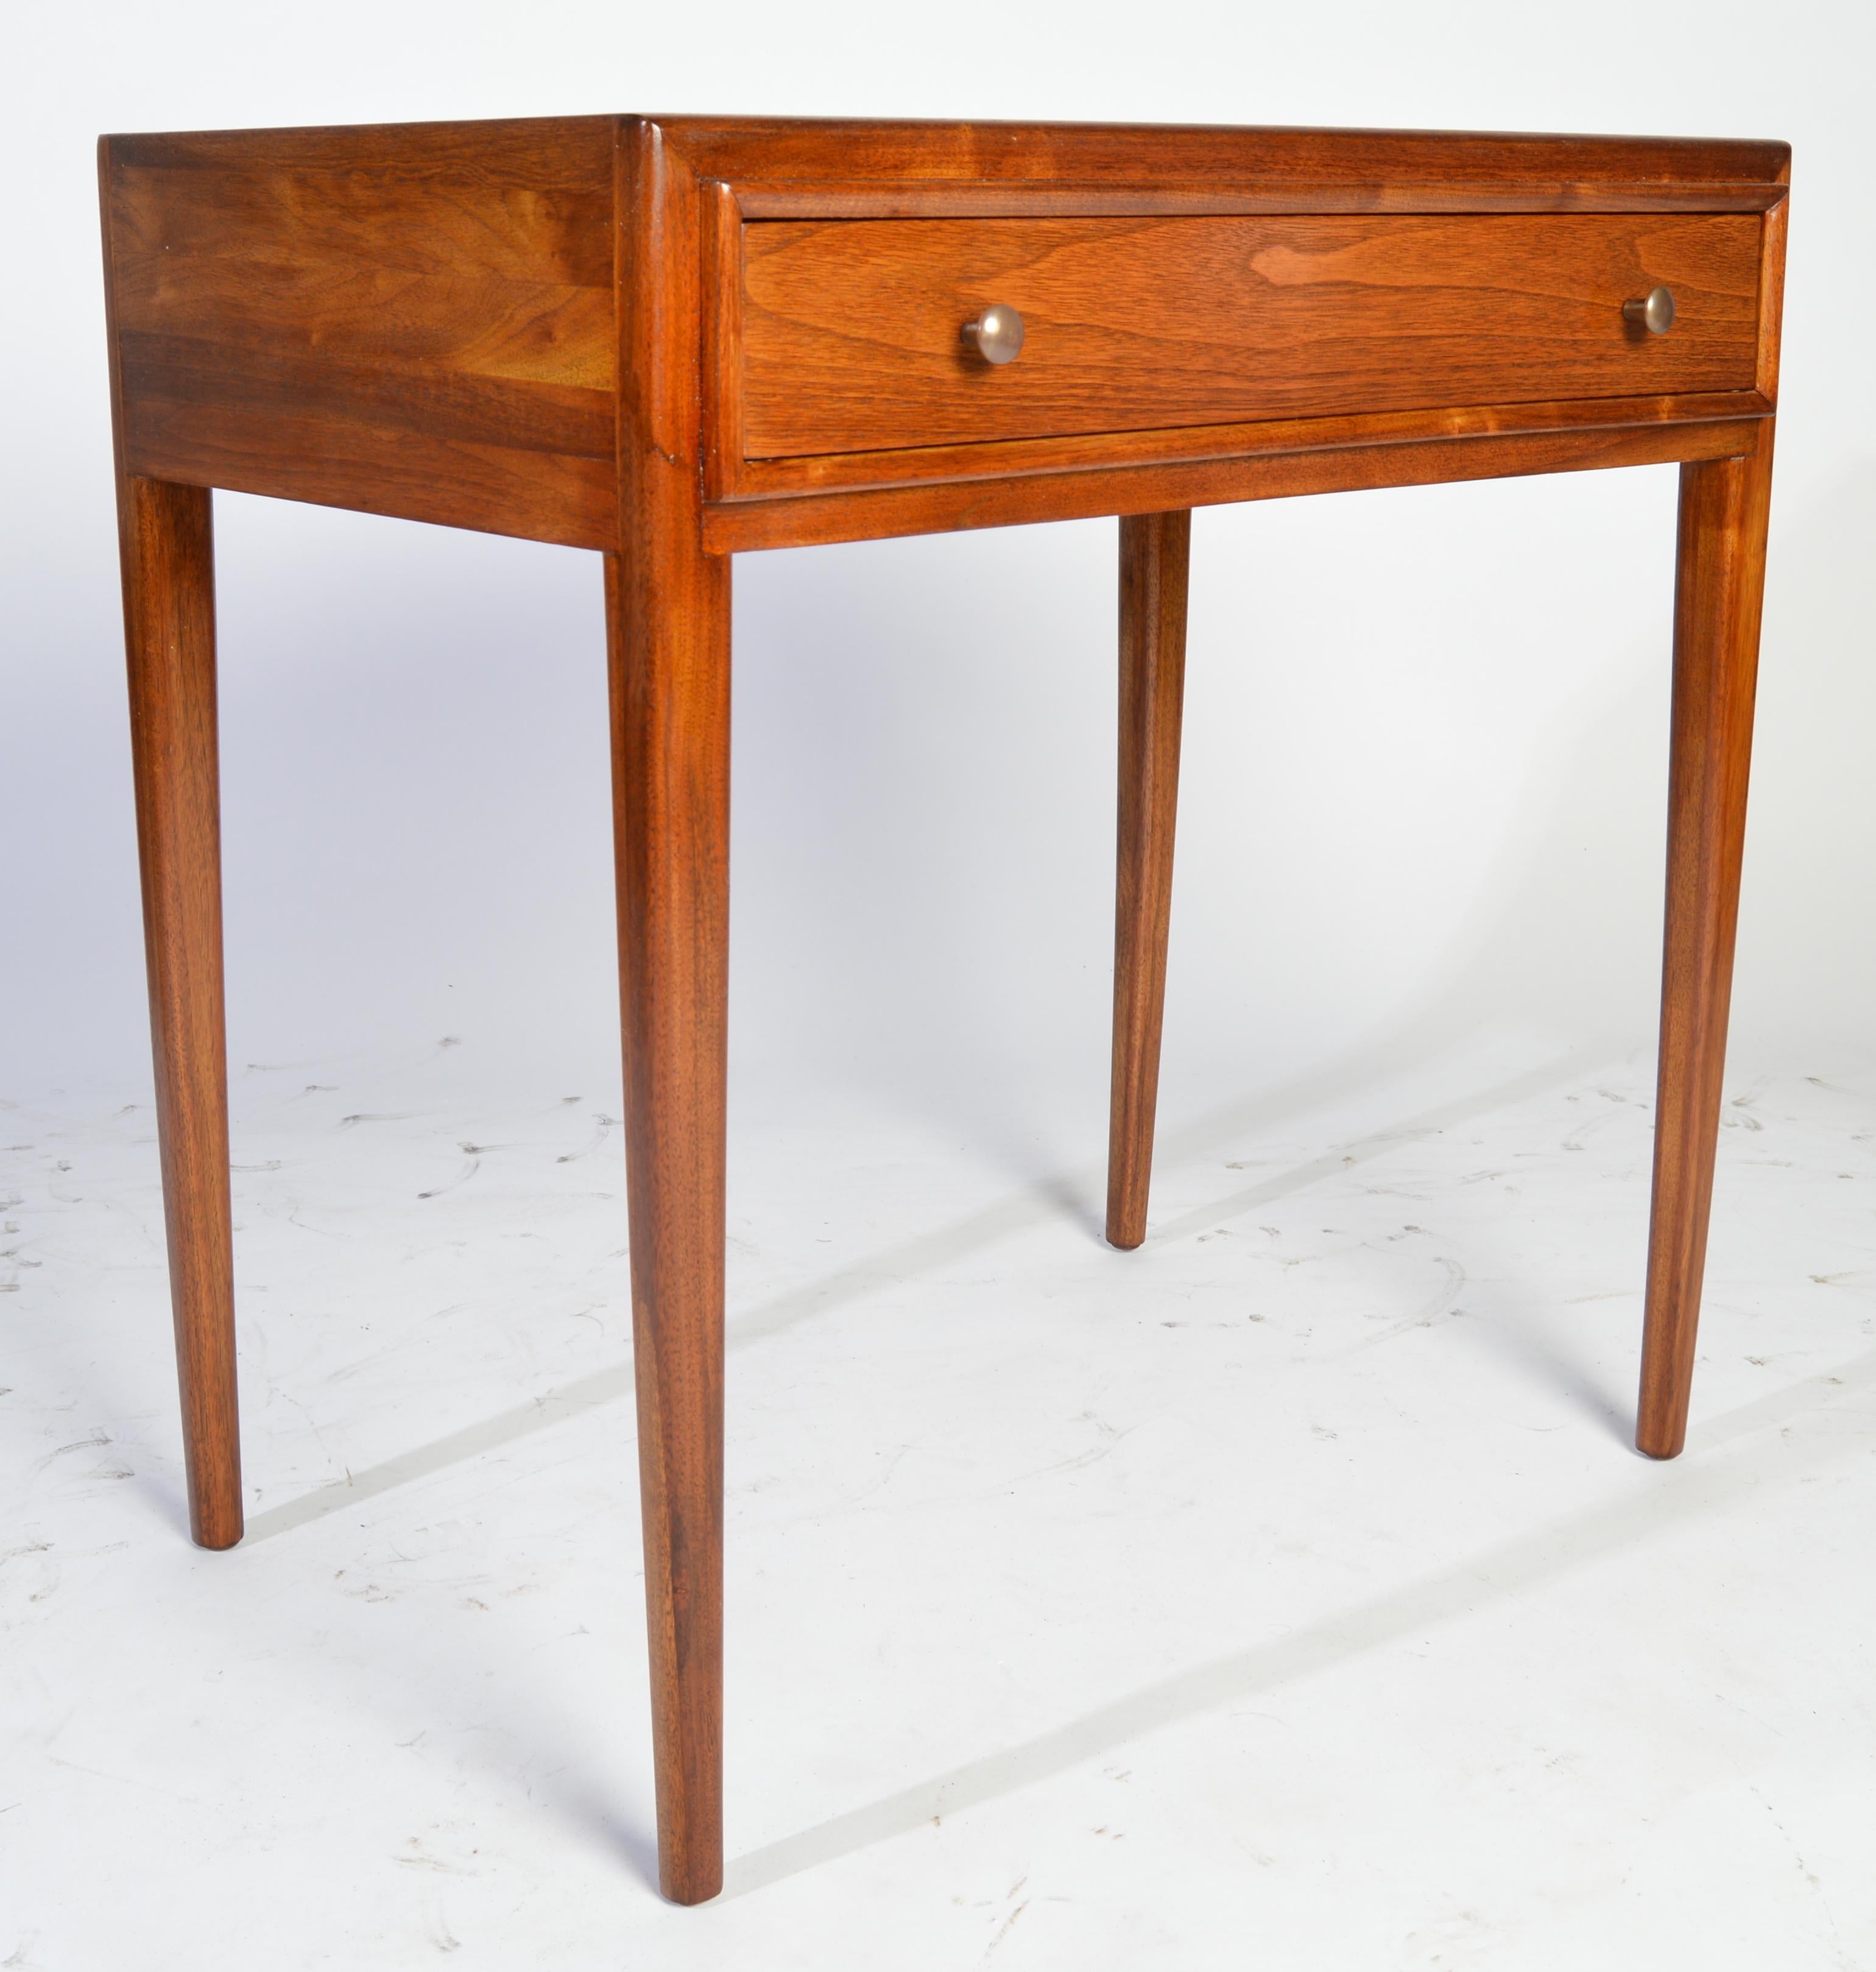 A beautiful, tall mahogany side table with single drawer having brass pulls manufactured by John Stuart for their Janus collection. 
Outstanding overall condition inside and out.